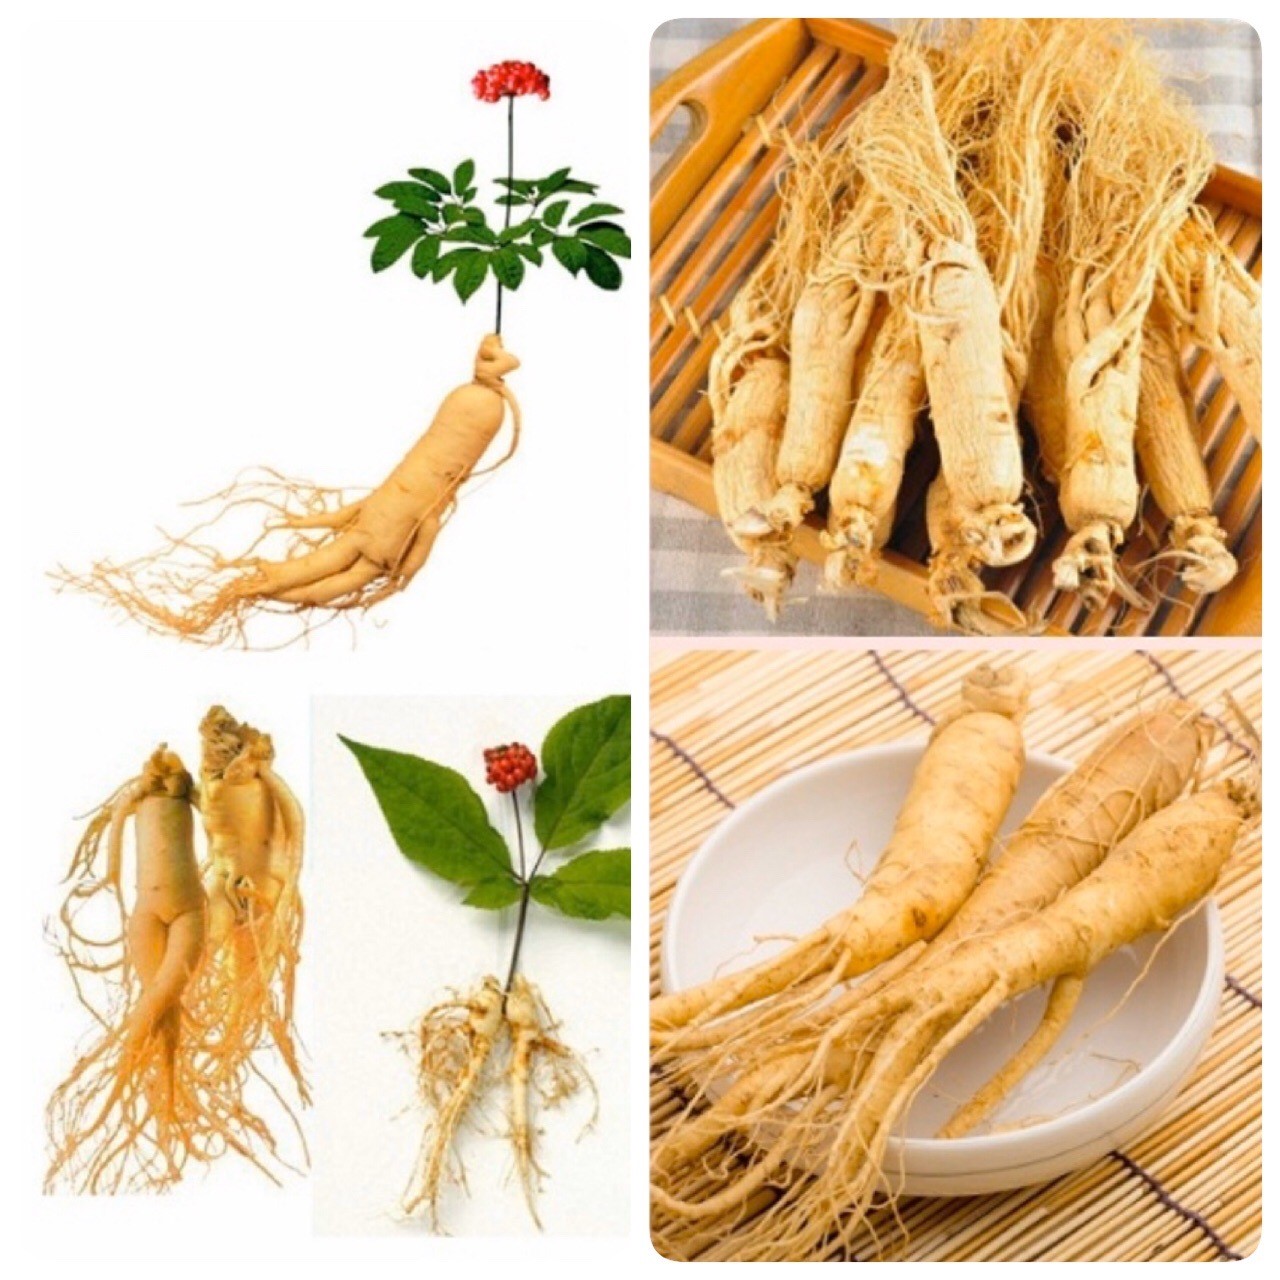 Ginseng : One of most valuable herbs for health and beauty